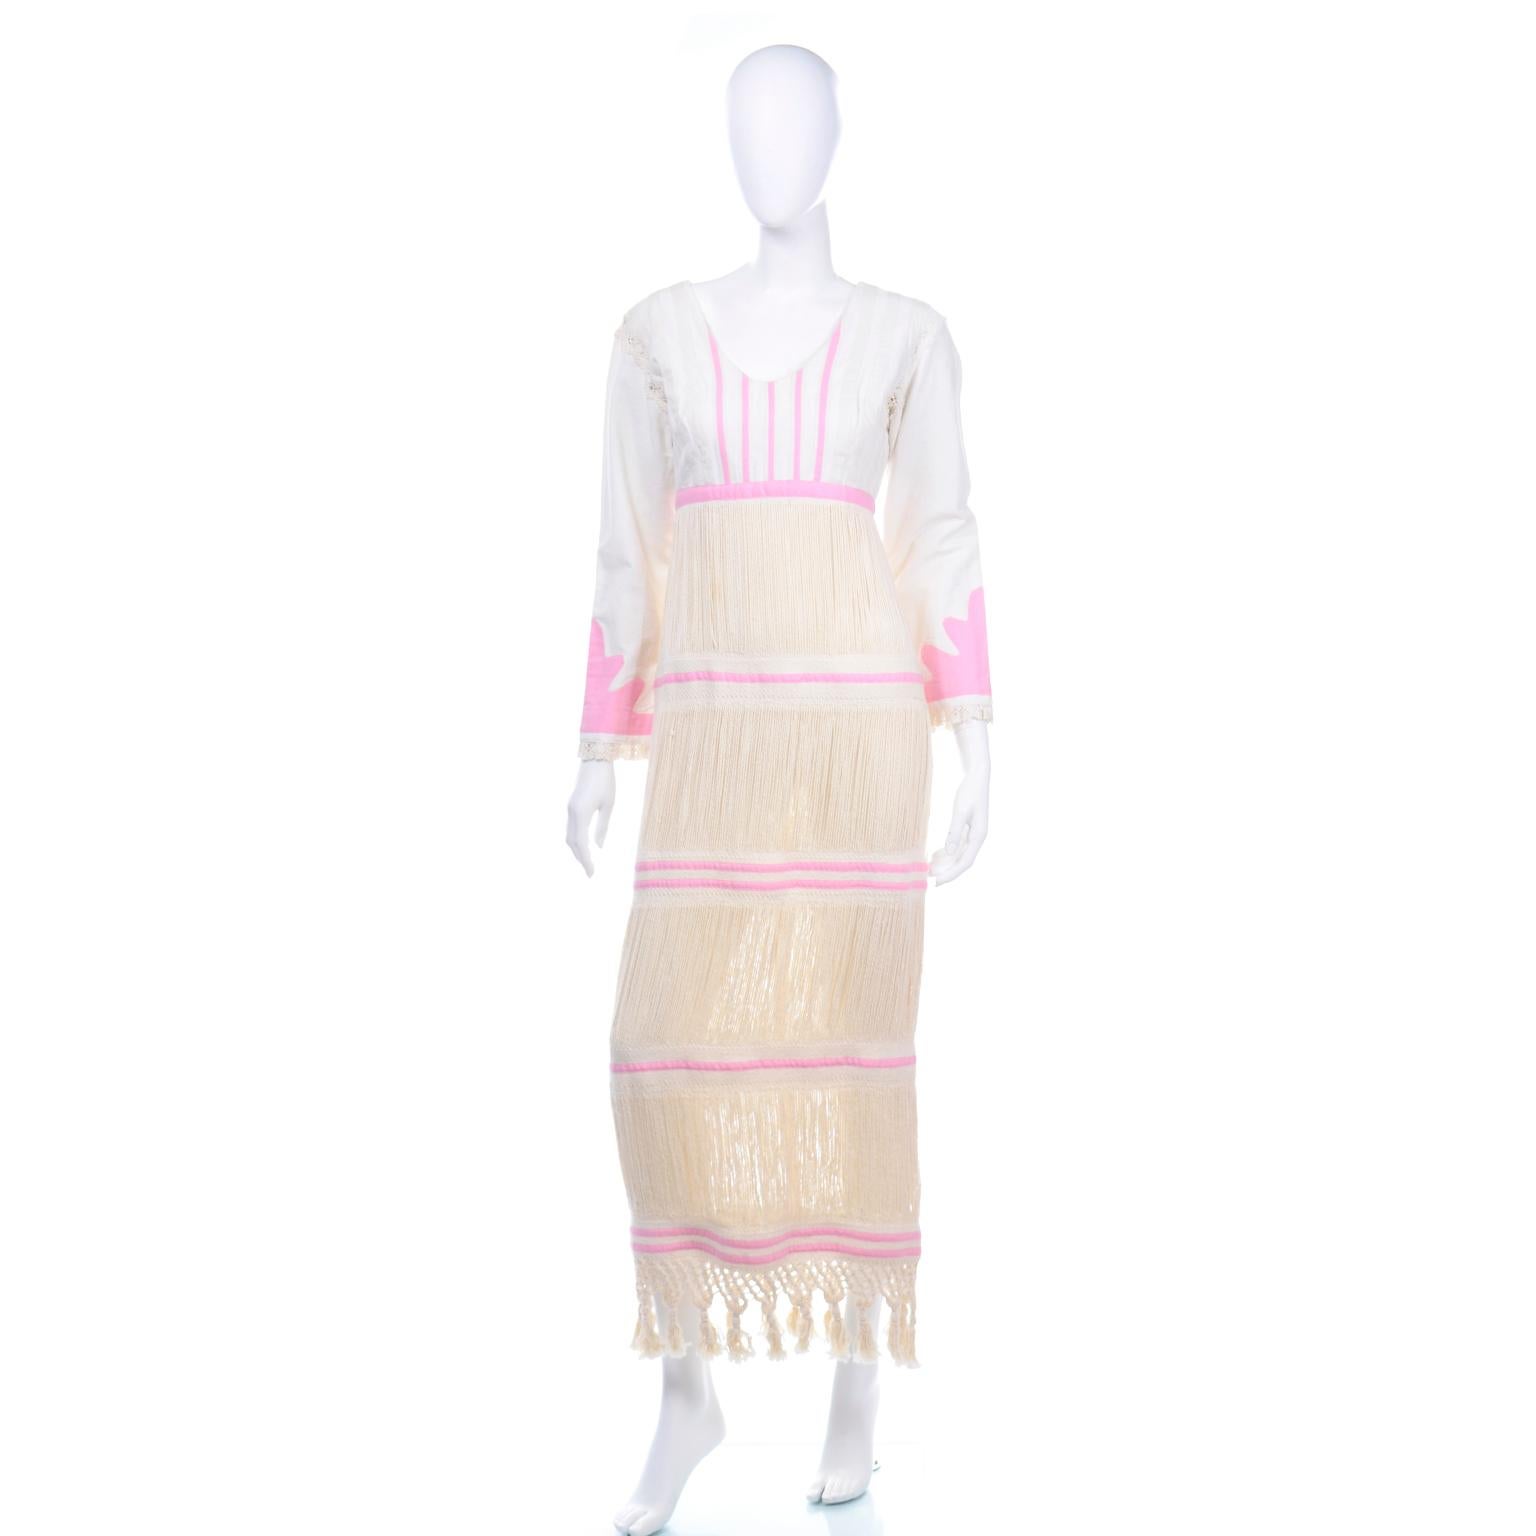 This one of a kind vintage dress came from an estate of collectible higher end ethnic folk clothing from Mexico, Central America and South America from the 1960's and 1970s. We have never seen anything quite like this particular vintage dress! The